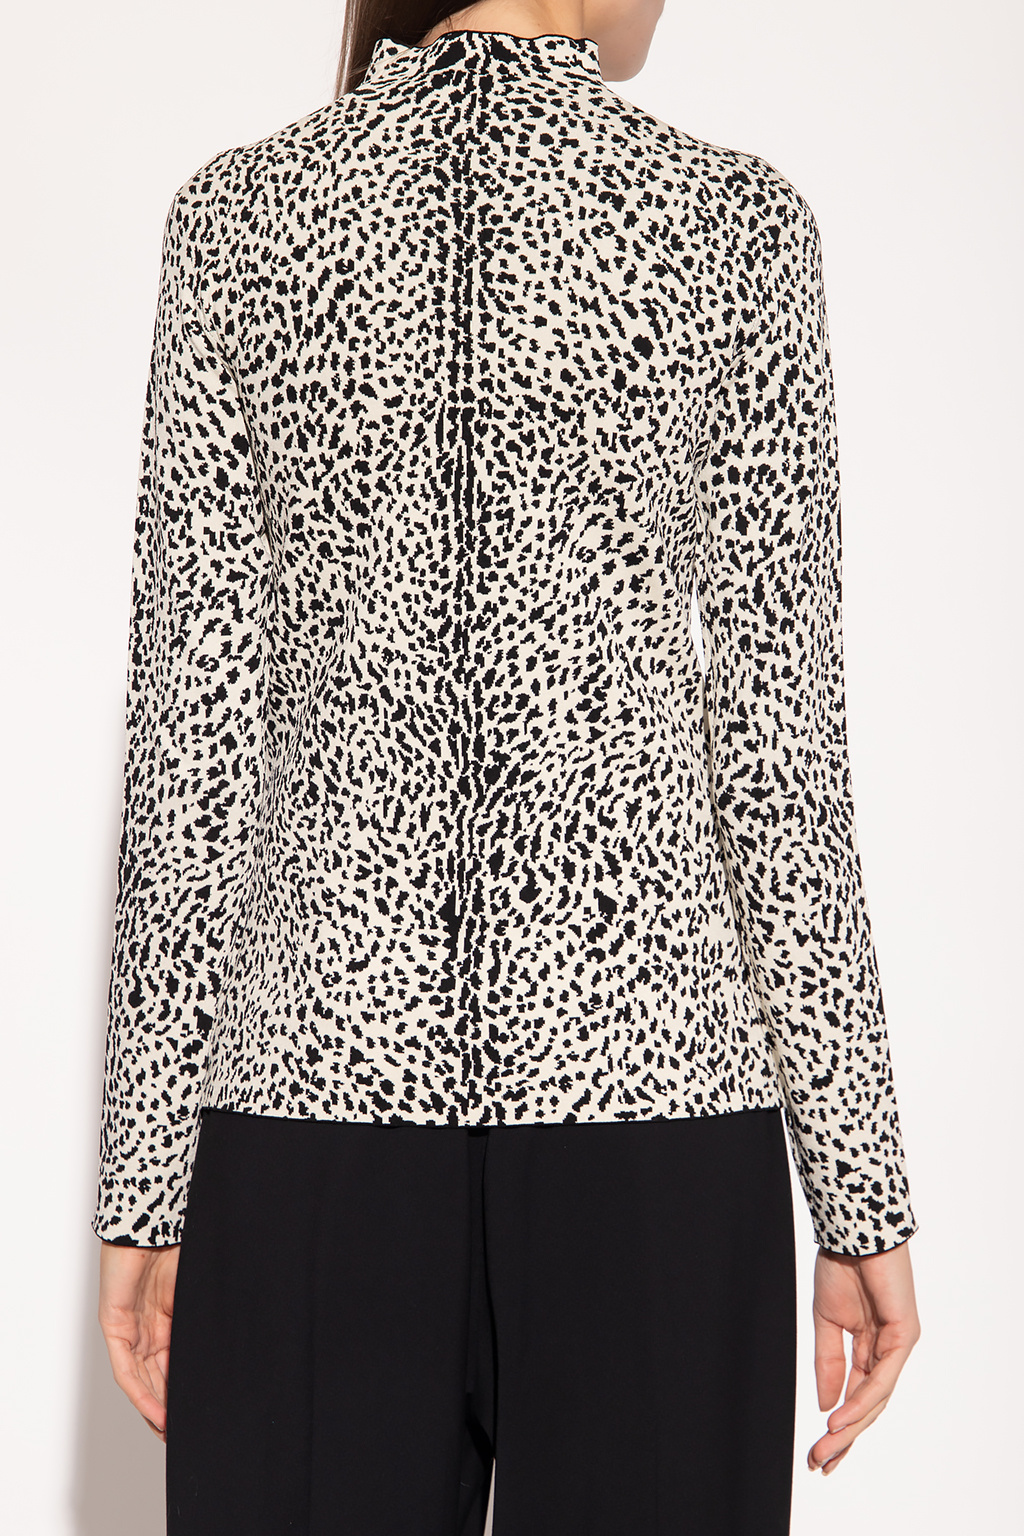 Proenza Schouler Top with stand collar